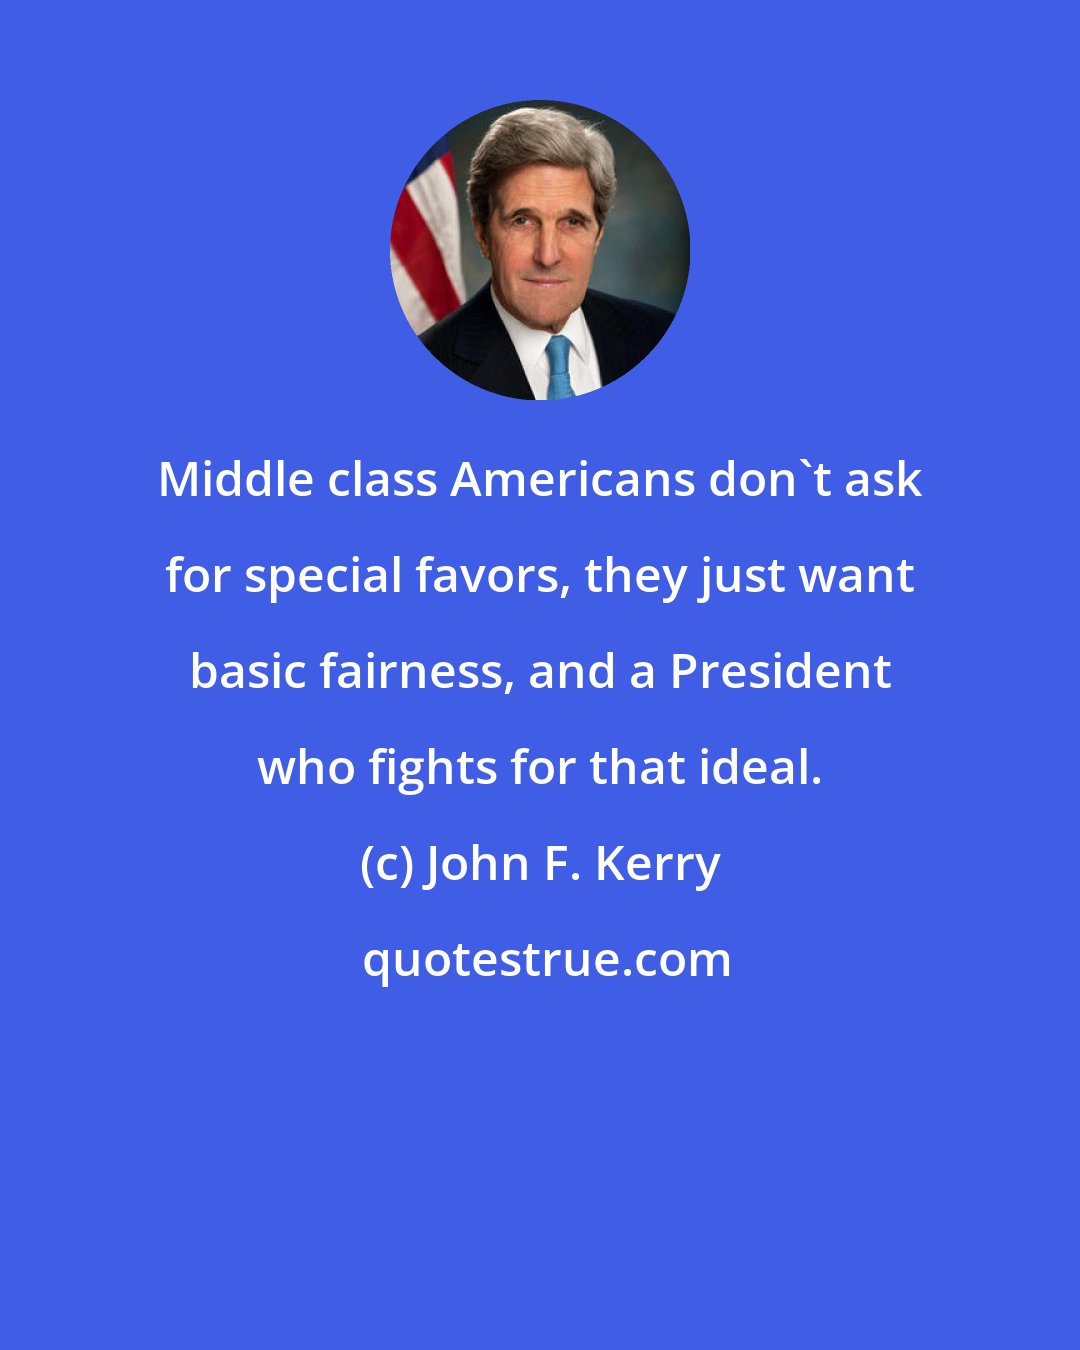 John F. Kerry: Middle class Americans don't ask for special favors, they just want basic fairness, and a President who fights for that ideal.